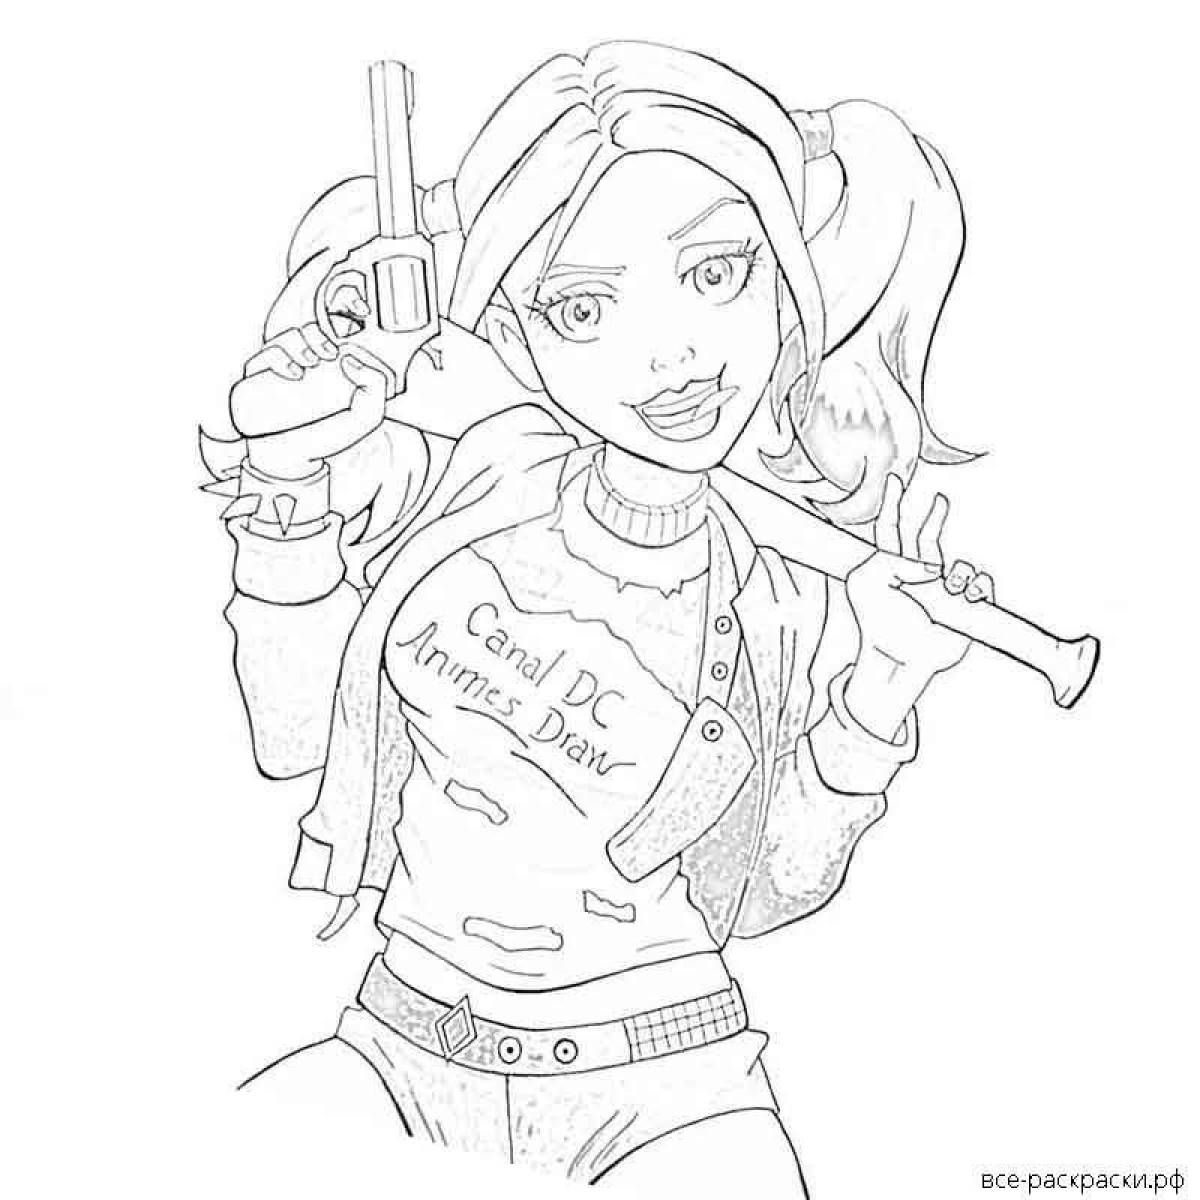 Violent harley quinn coloring page